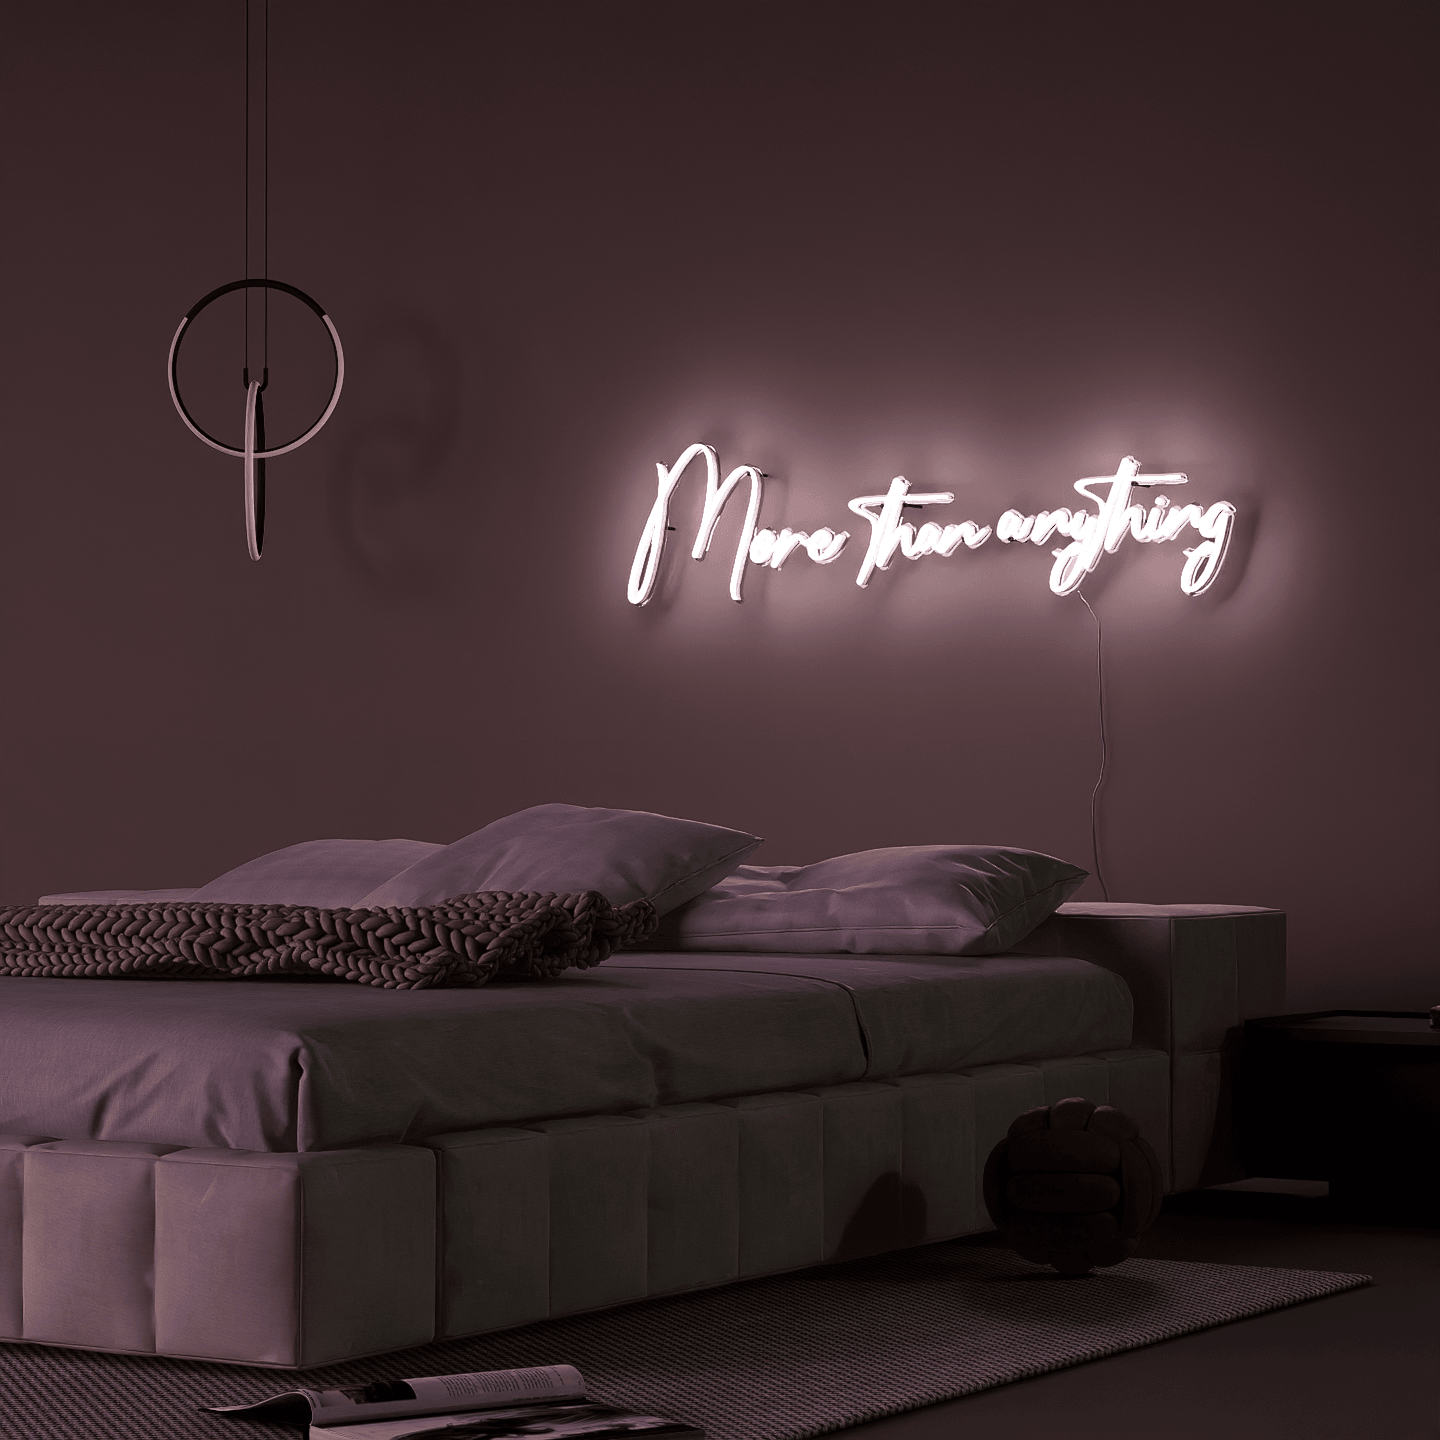 side-shot-of-illuminated-white-neon-lights-hanging-on-the-wall-at-nightmore-than-anything